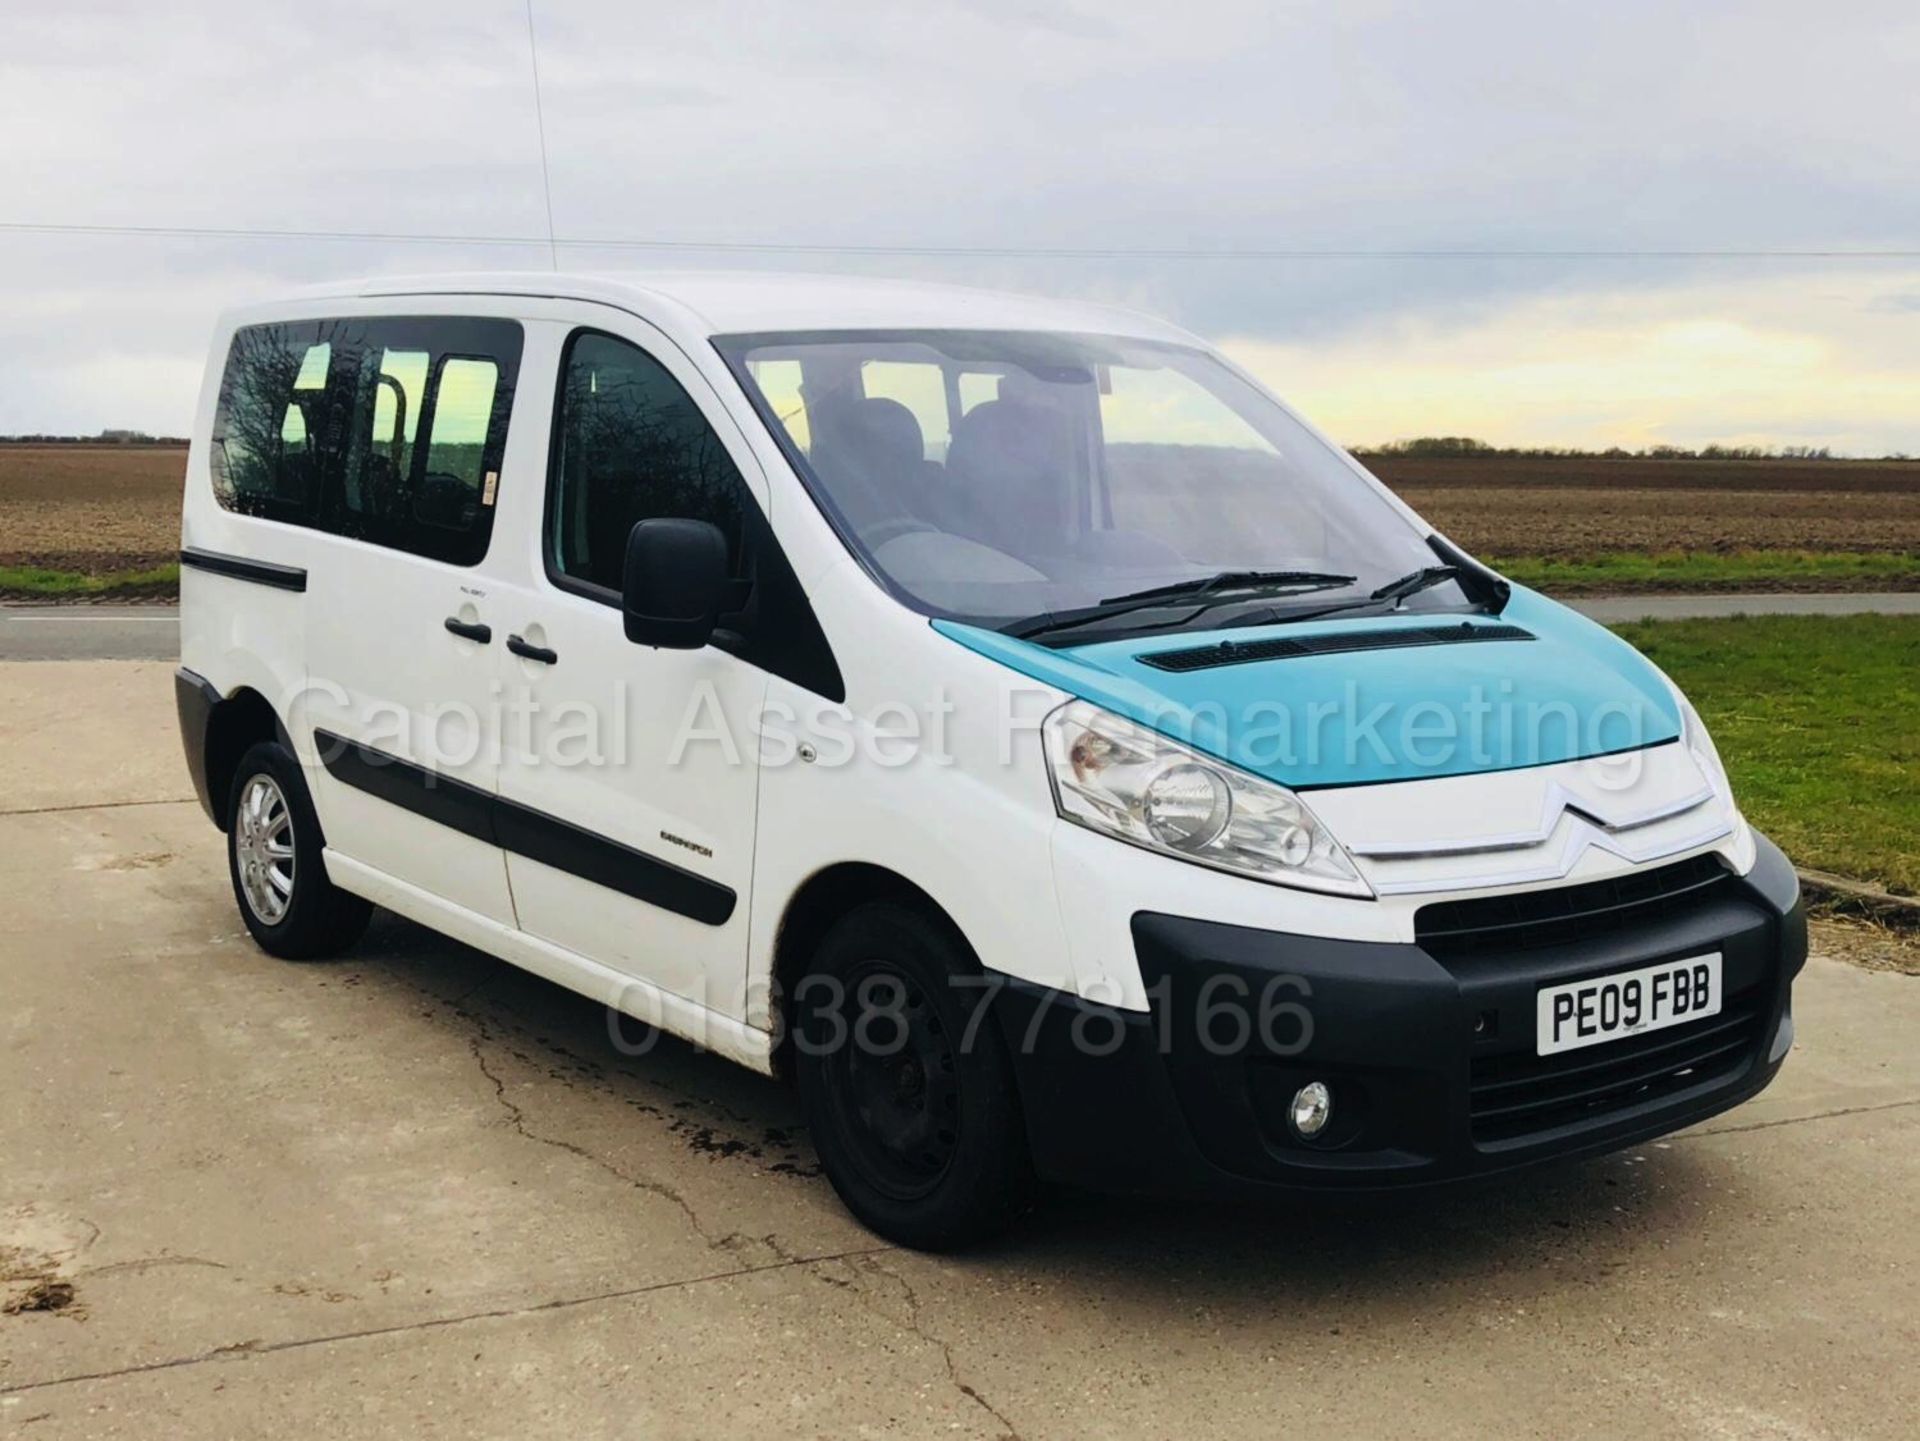 (On Sale) CITROEN DISPATCH LWB '9 SEATER BUS' (2009 - 09 REG) '2.0 HDI -120 BHP - 6 SPEED' *AIR CON* - Image 7 of 20